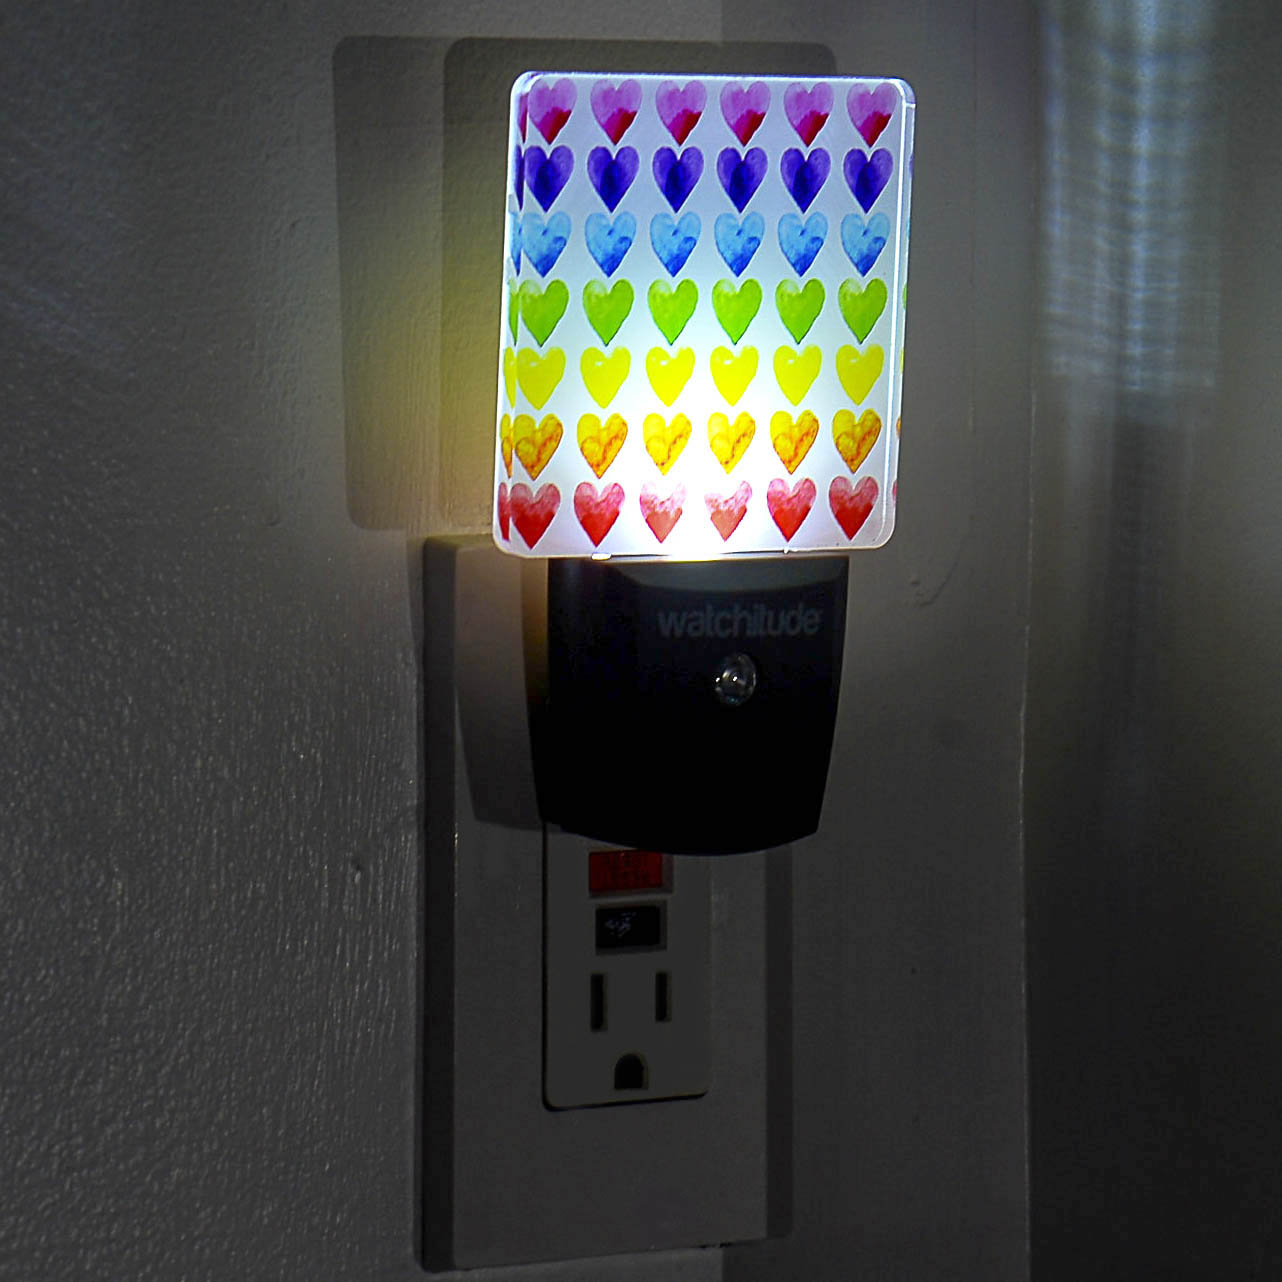 Watercolor Hearts - Watchitude LED Night Light